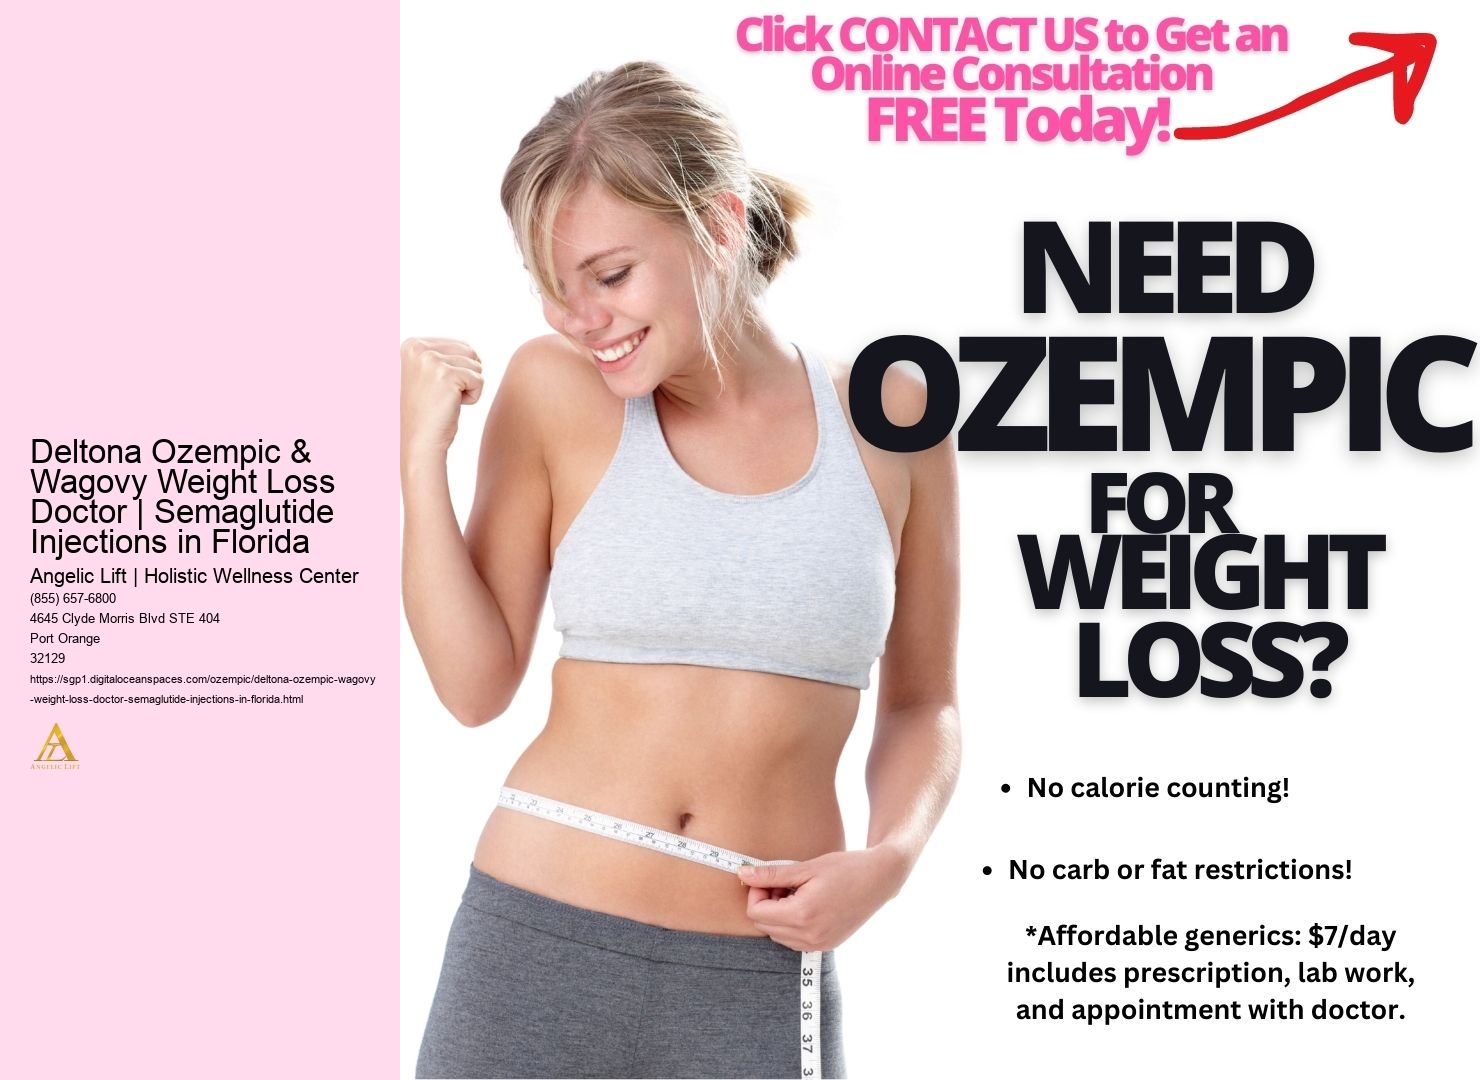 Deltona Ozempic & Wagovy Weight Loss Doctor | Semaglutide Injections in Florida